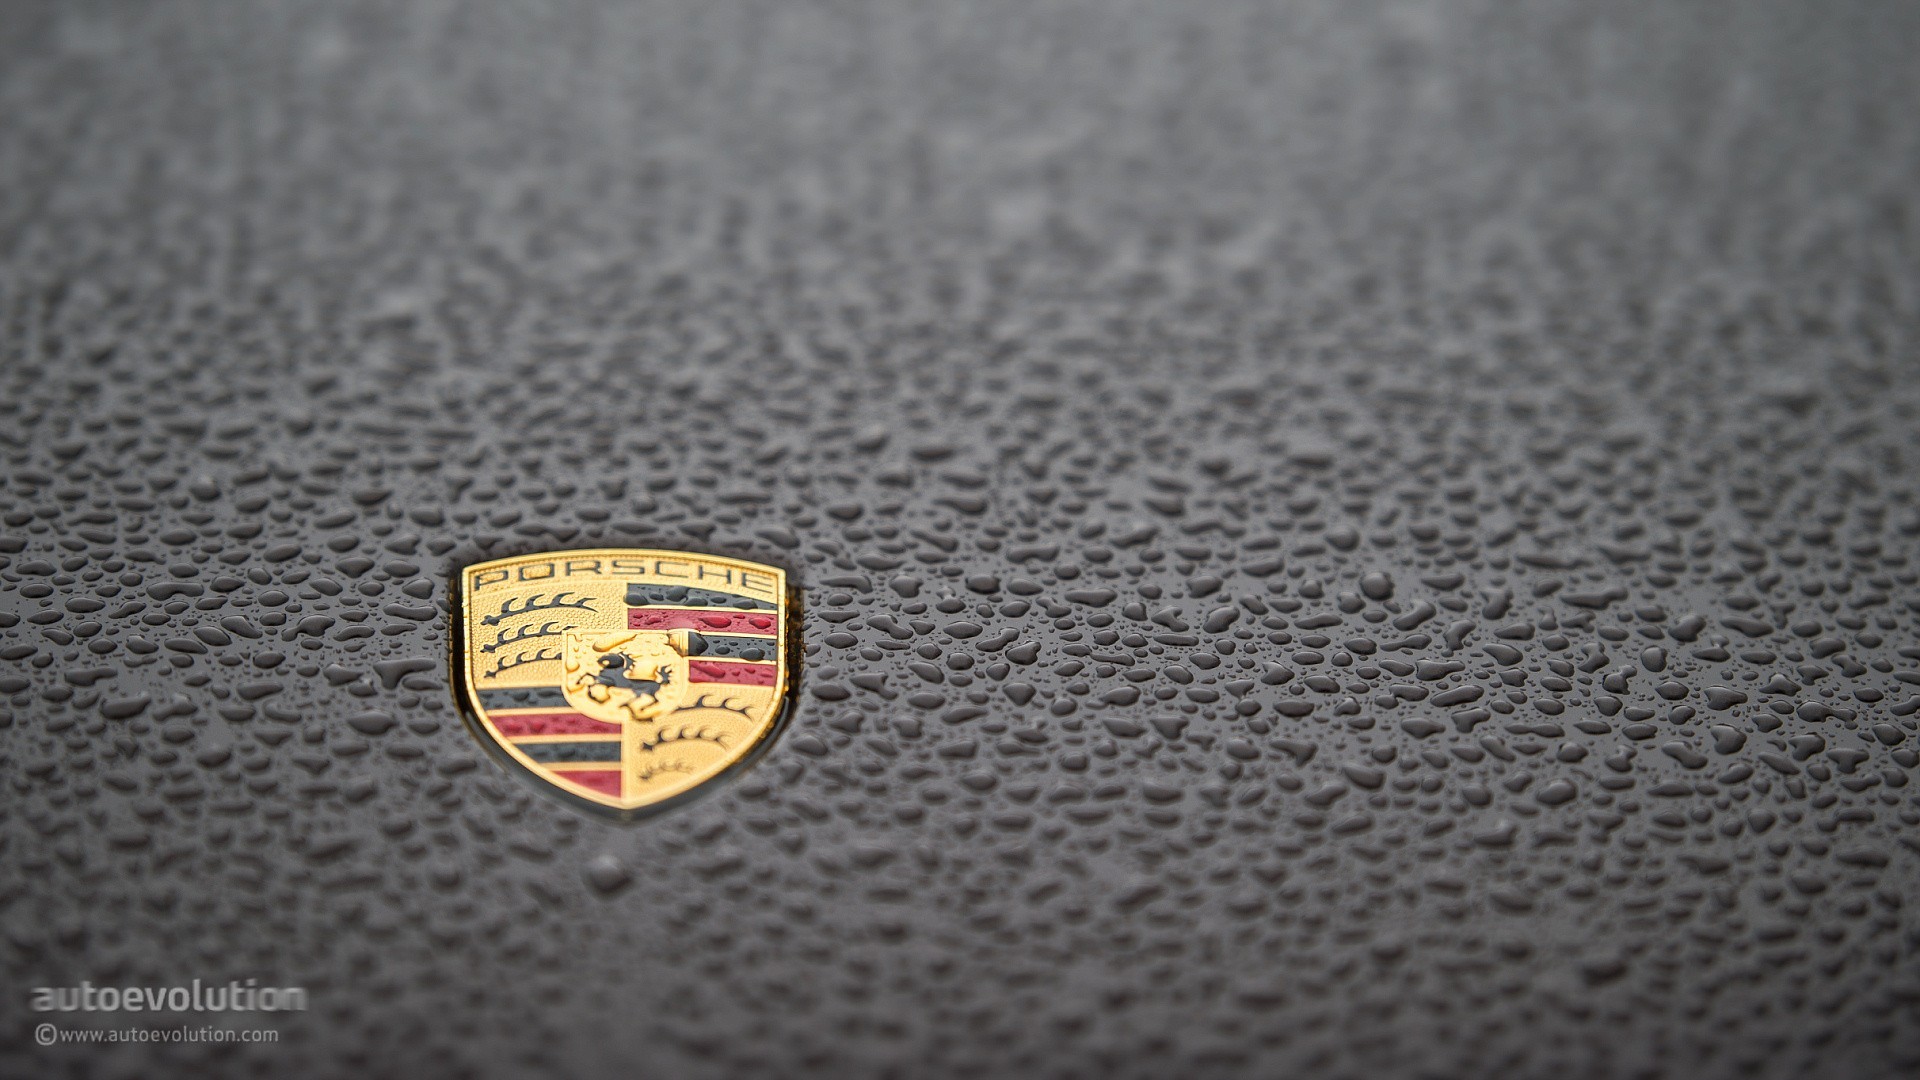 1920x1080 This is more than just the Porsche crest ...